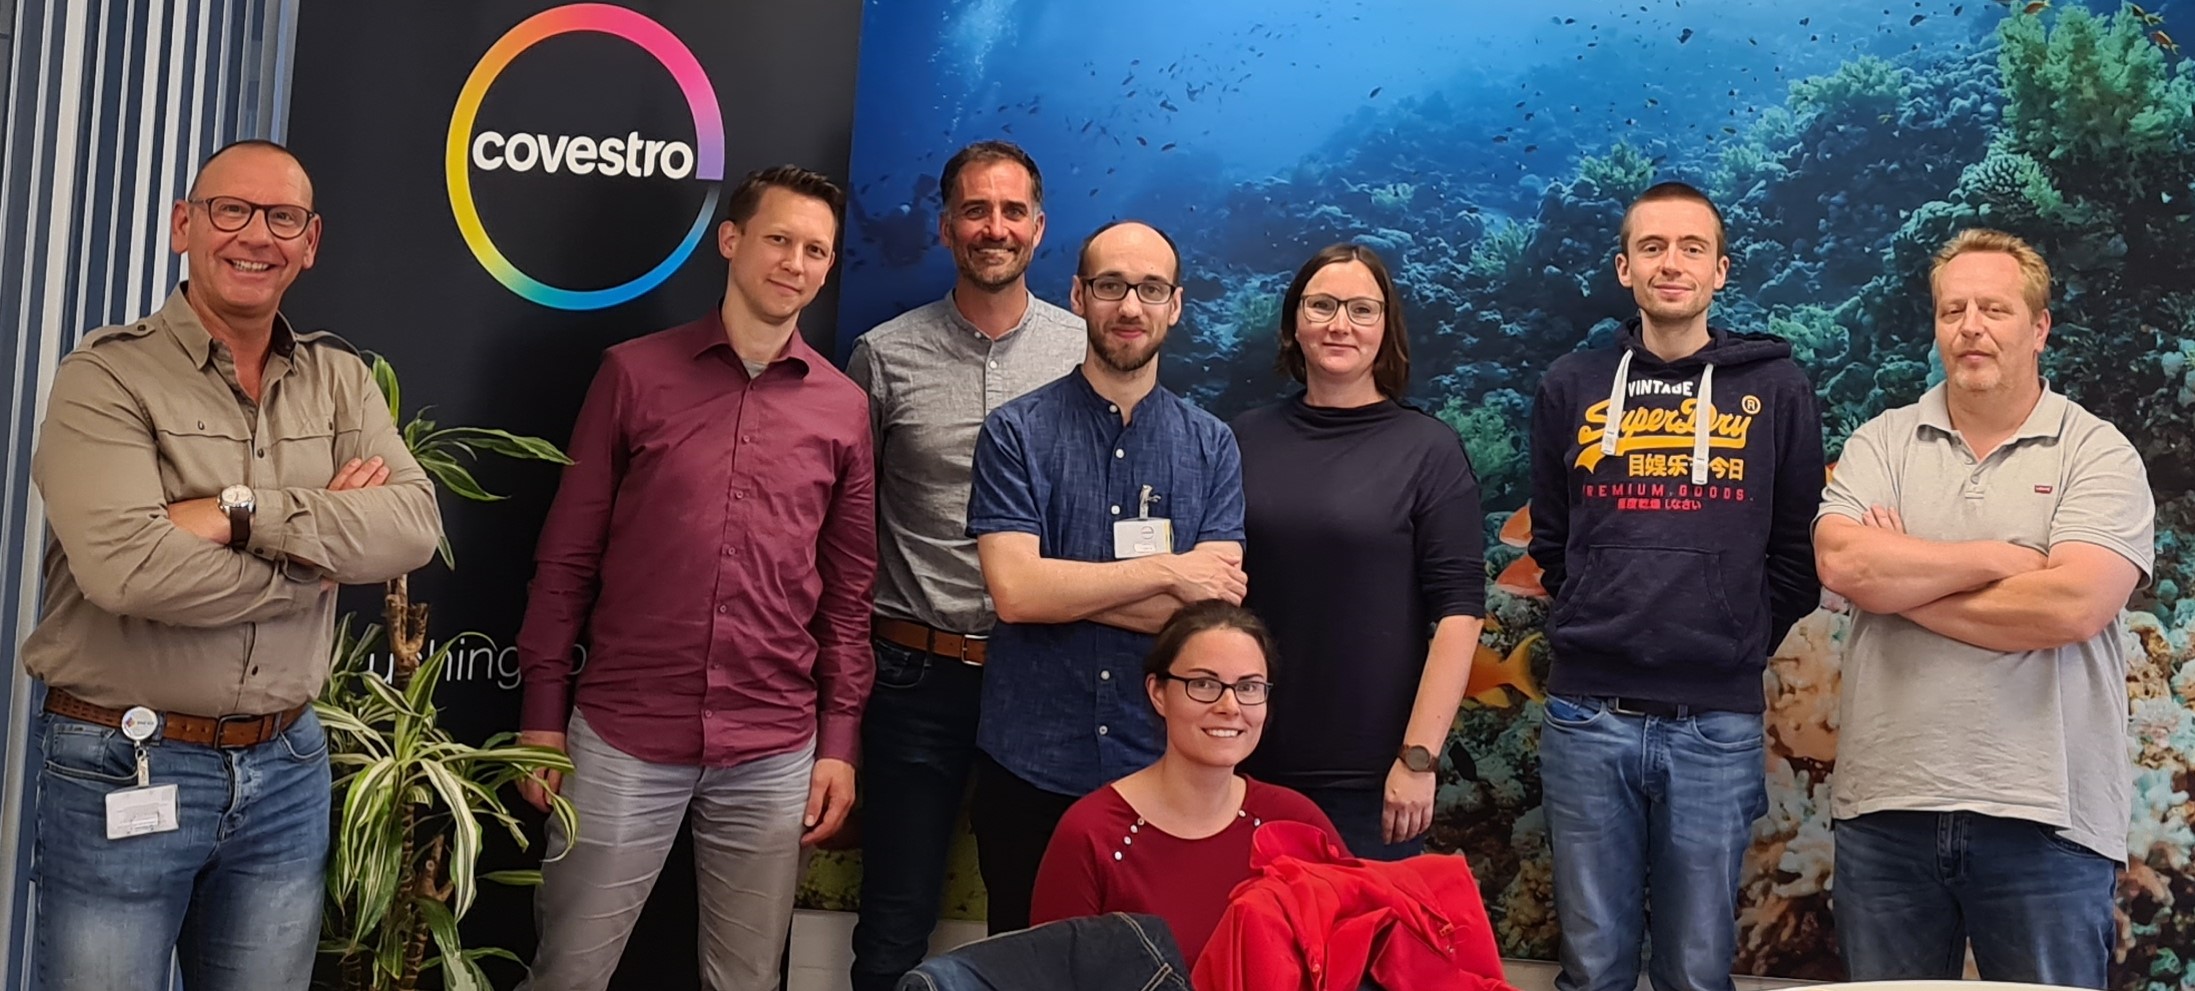 Visit at Covestro in the Netherlands